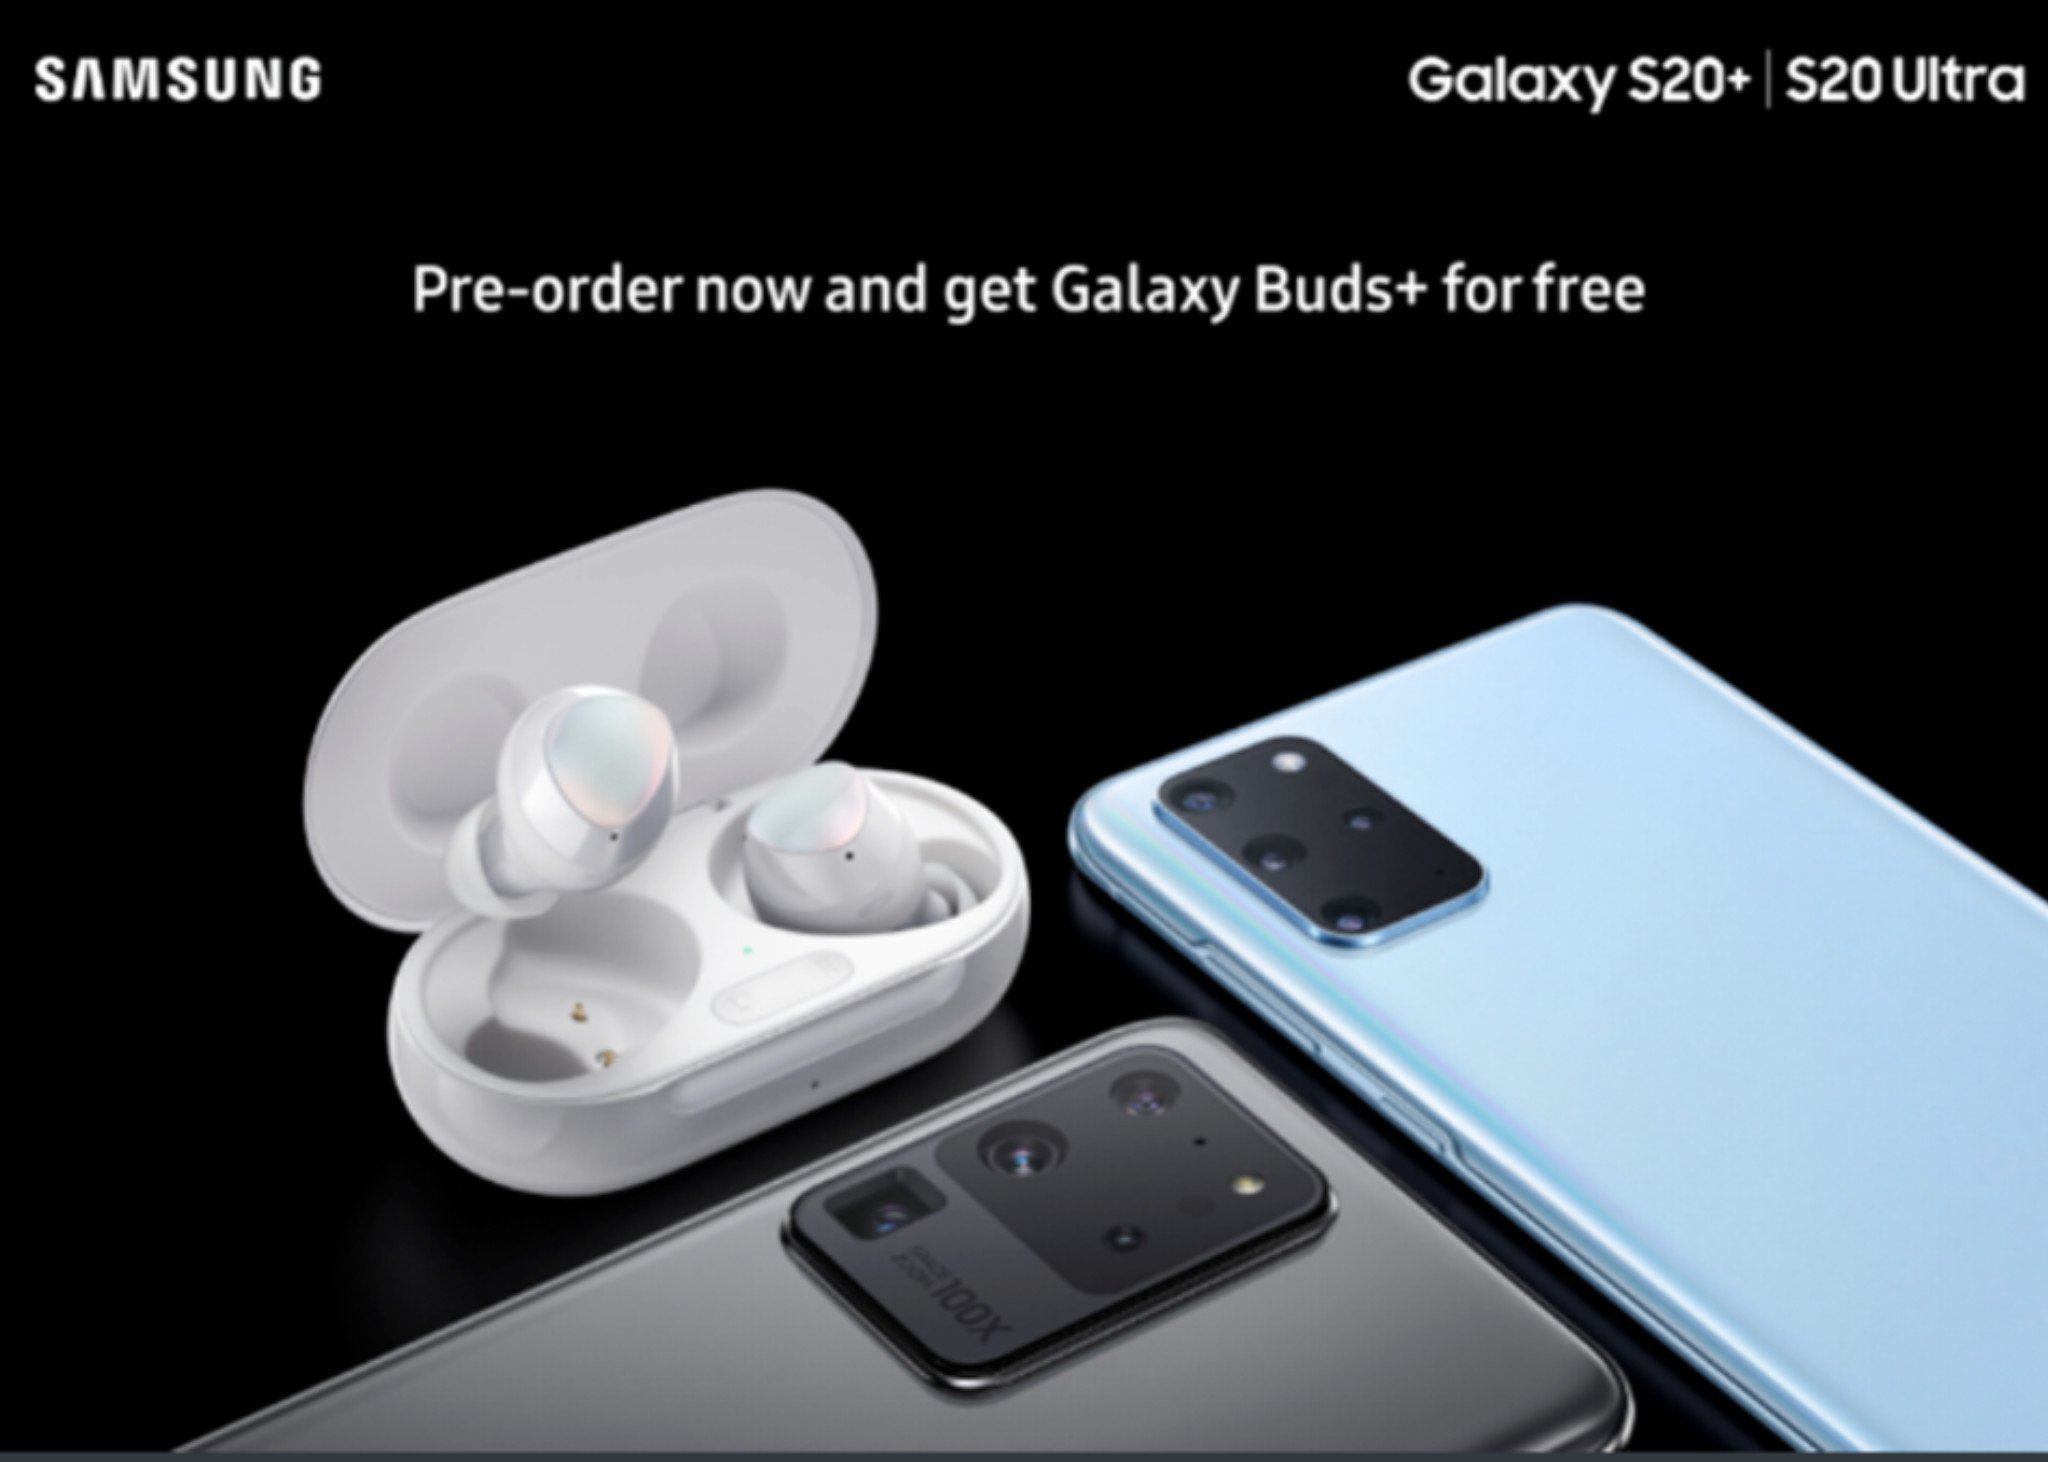 Samsung pre-order promo for Galaxy S20+ and S20 Ultra